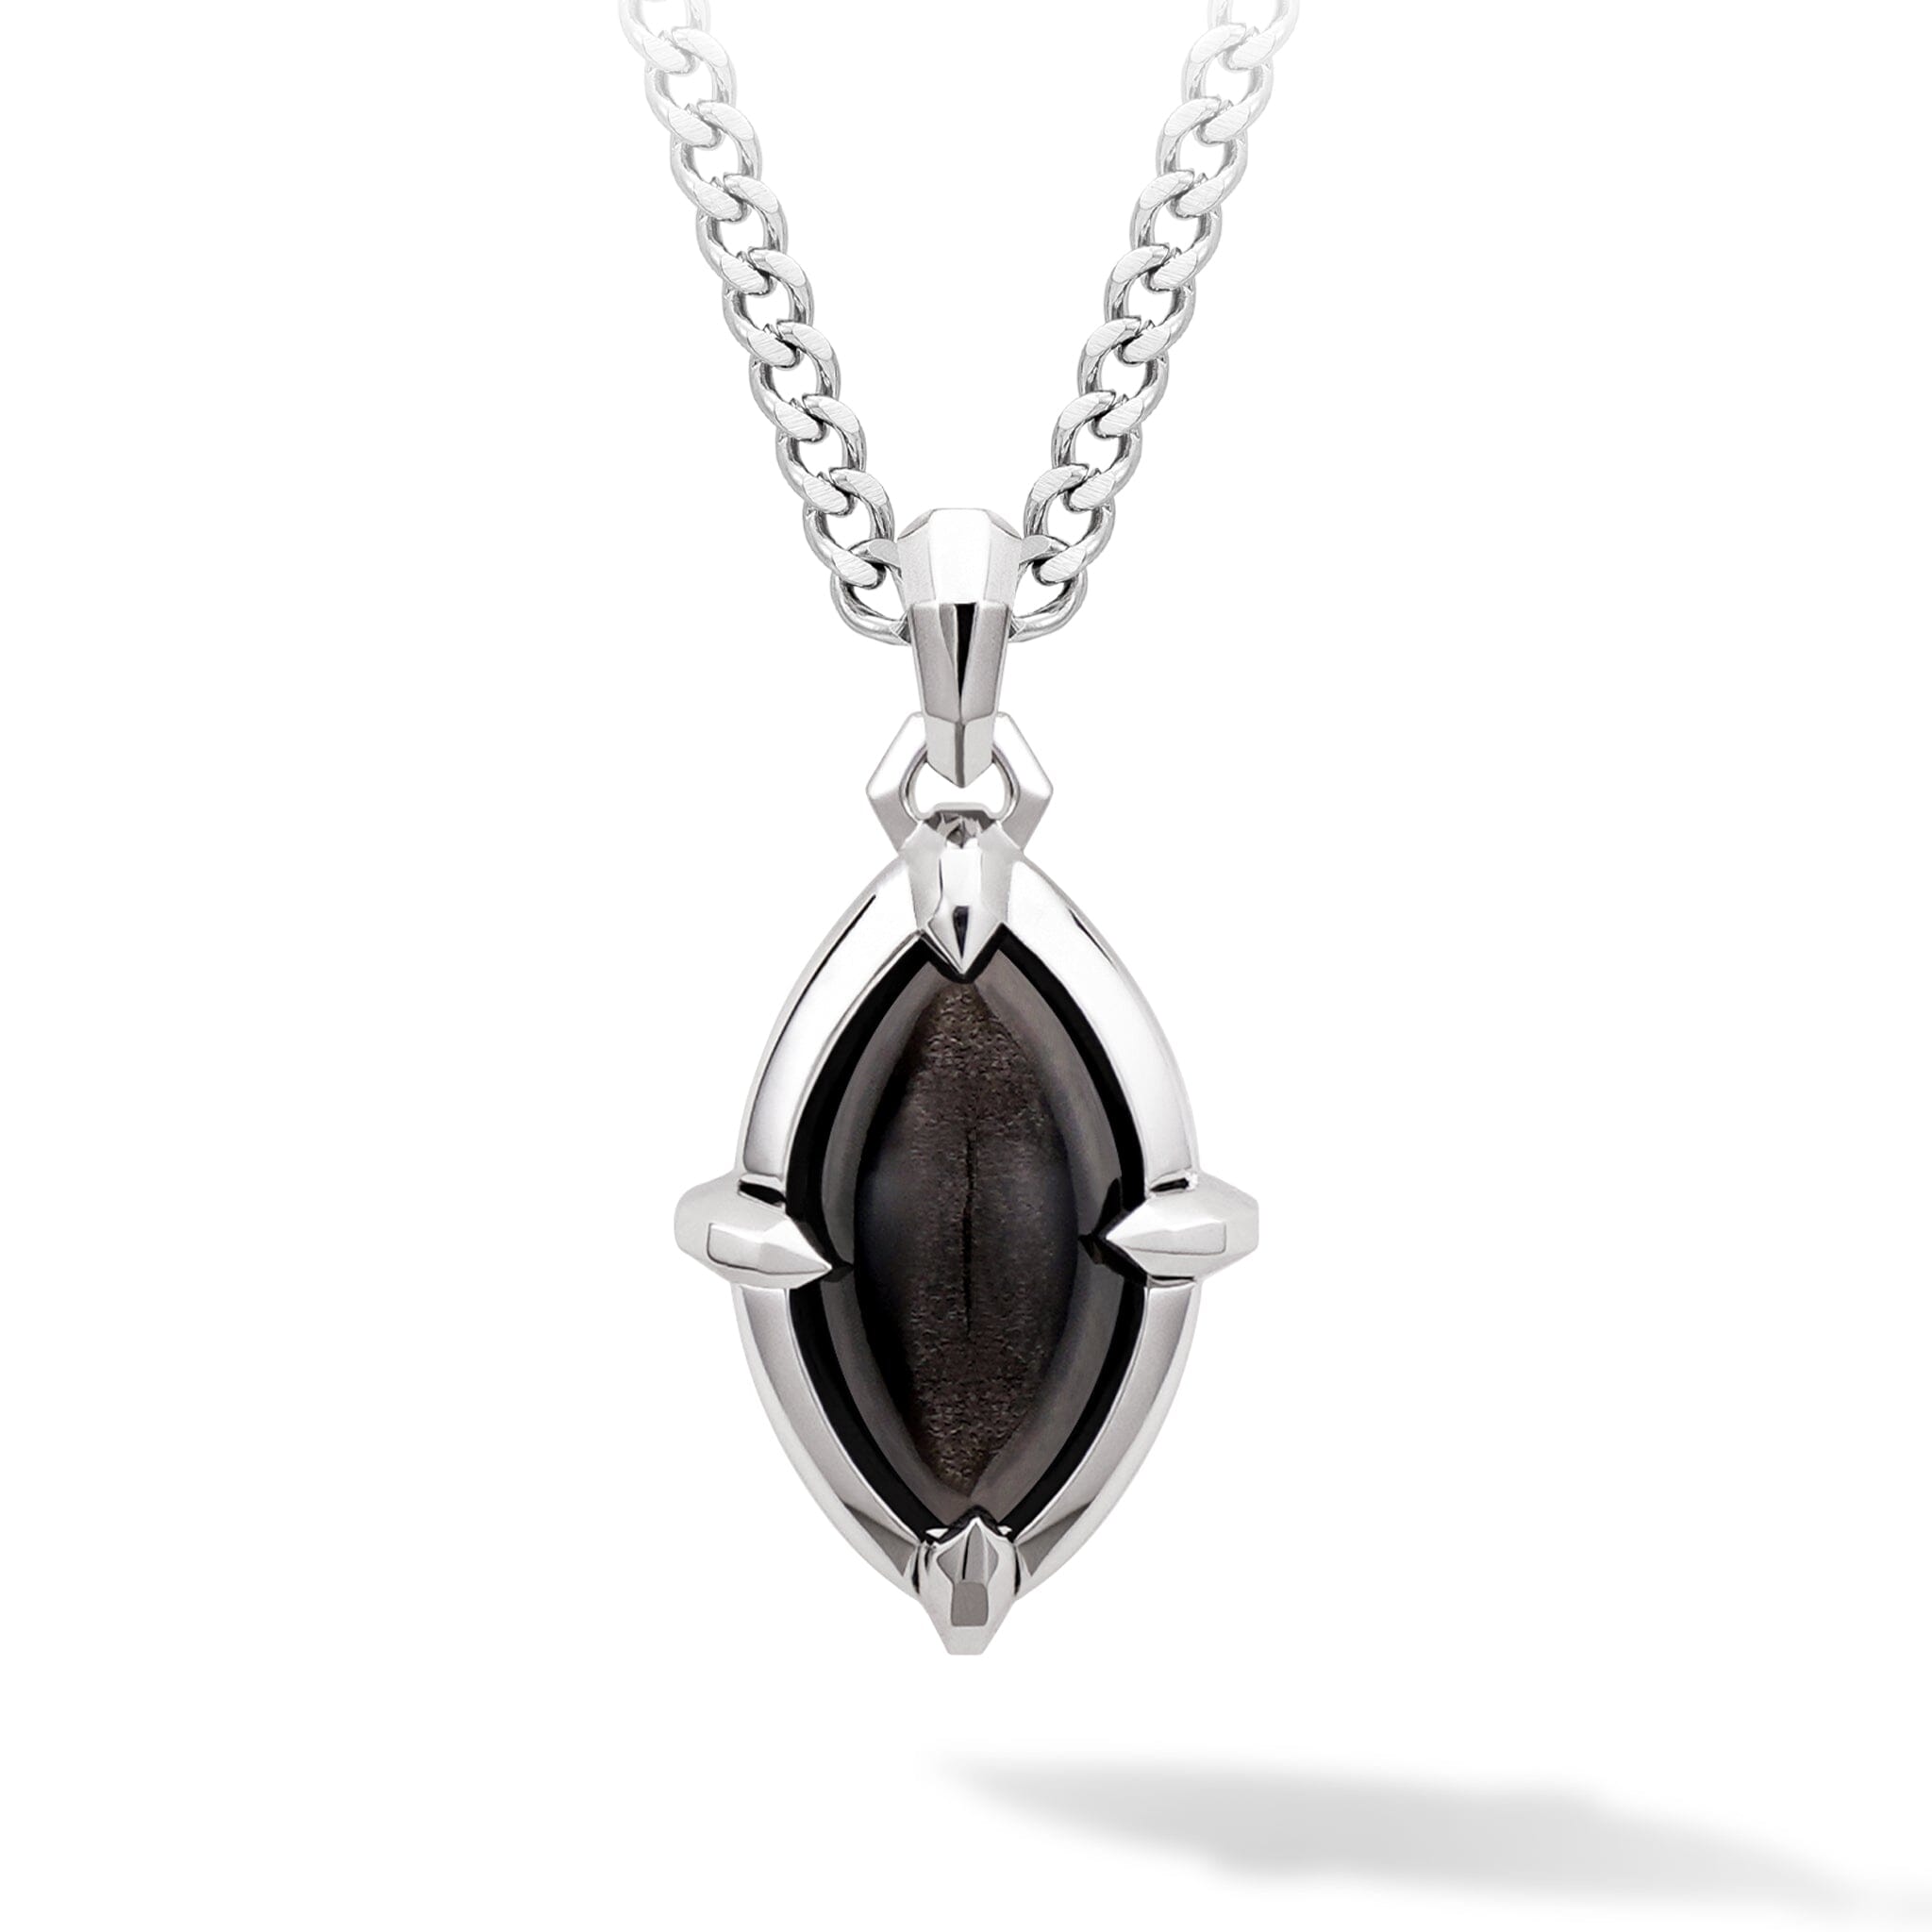 Silver Obsidian Vision Necklace Necklaces AWNL Stainless Set 55cm 